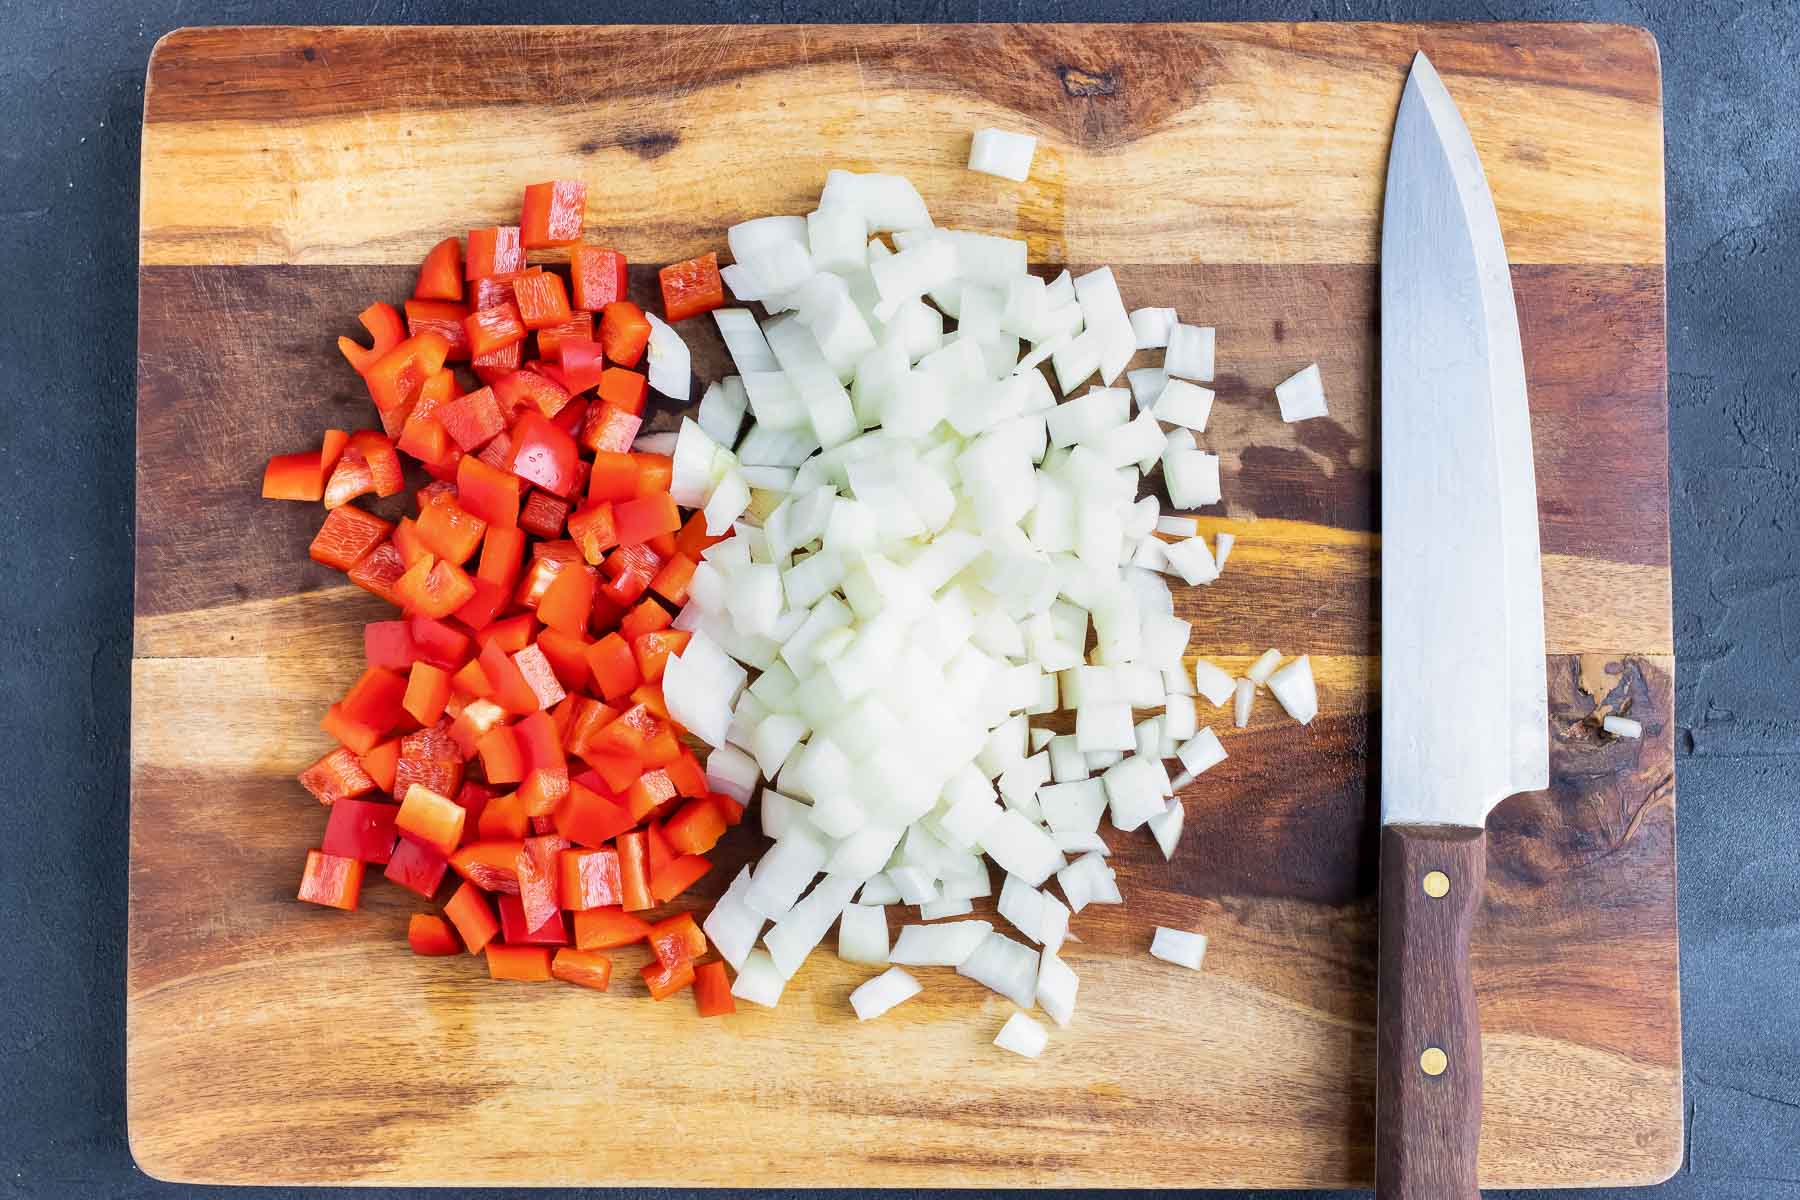 Diced onion and bell peppers for a gallo pinto recipe.